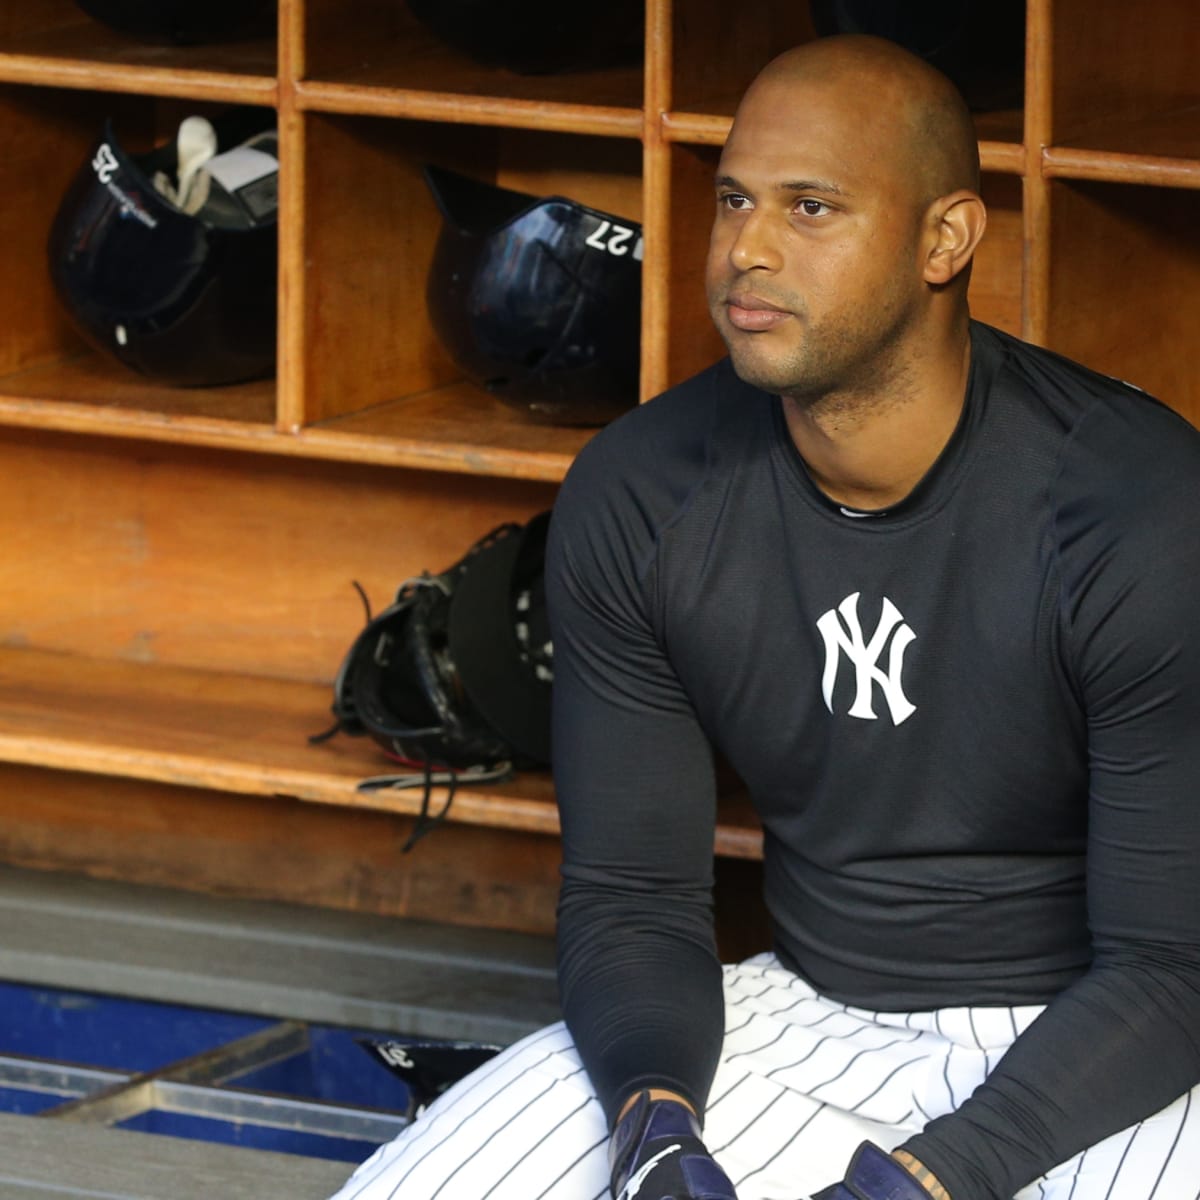 Aaron Hicks sits out vs. Blue Jays after Daunte Wright shooting